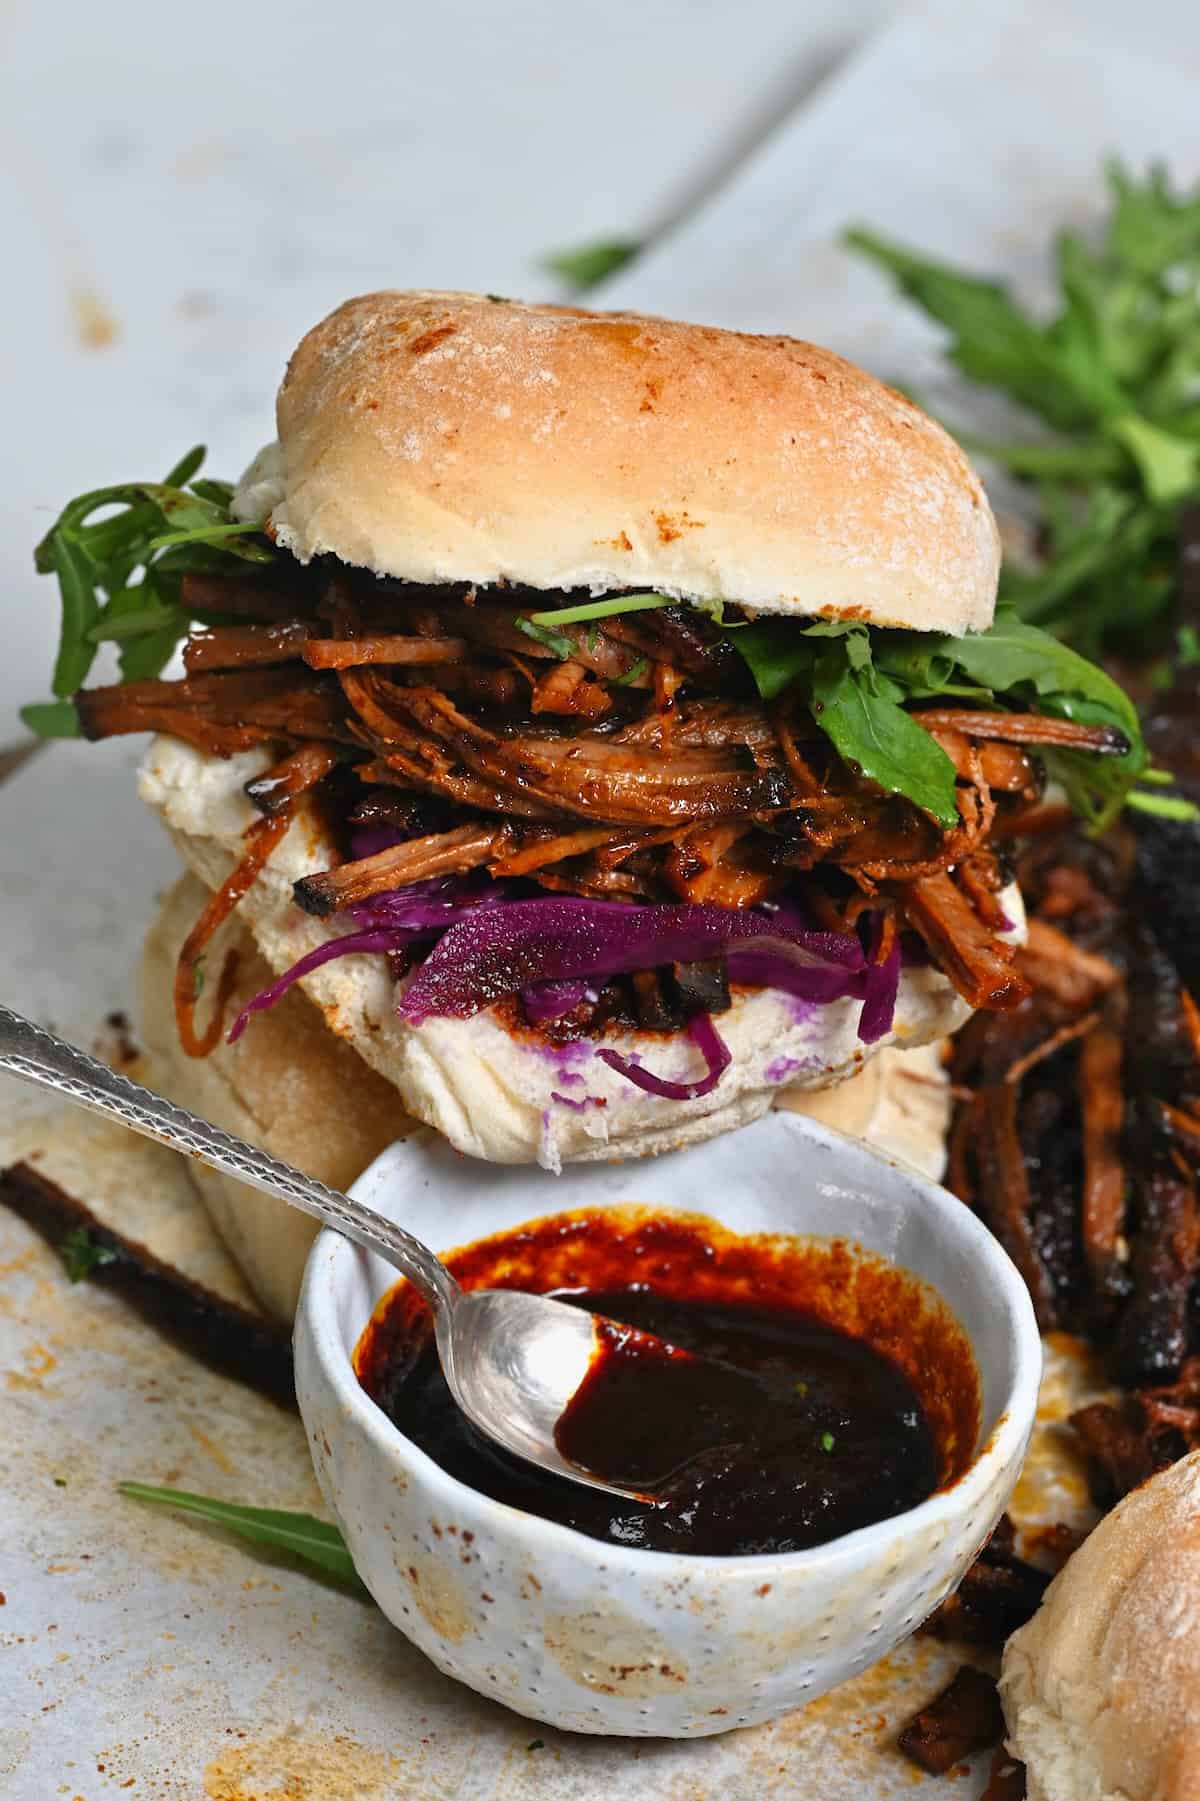 A burger served with homemade BBQ sauce